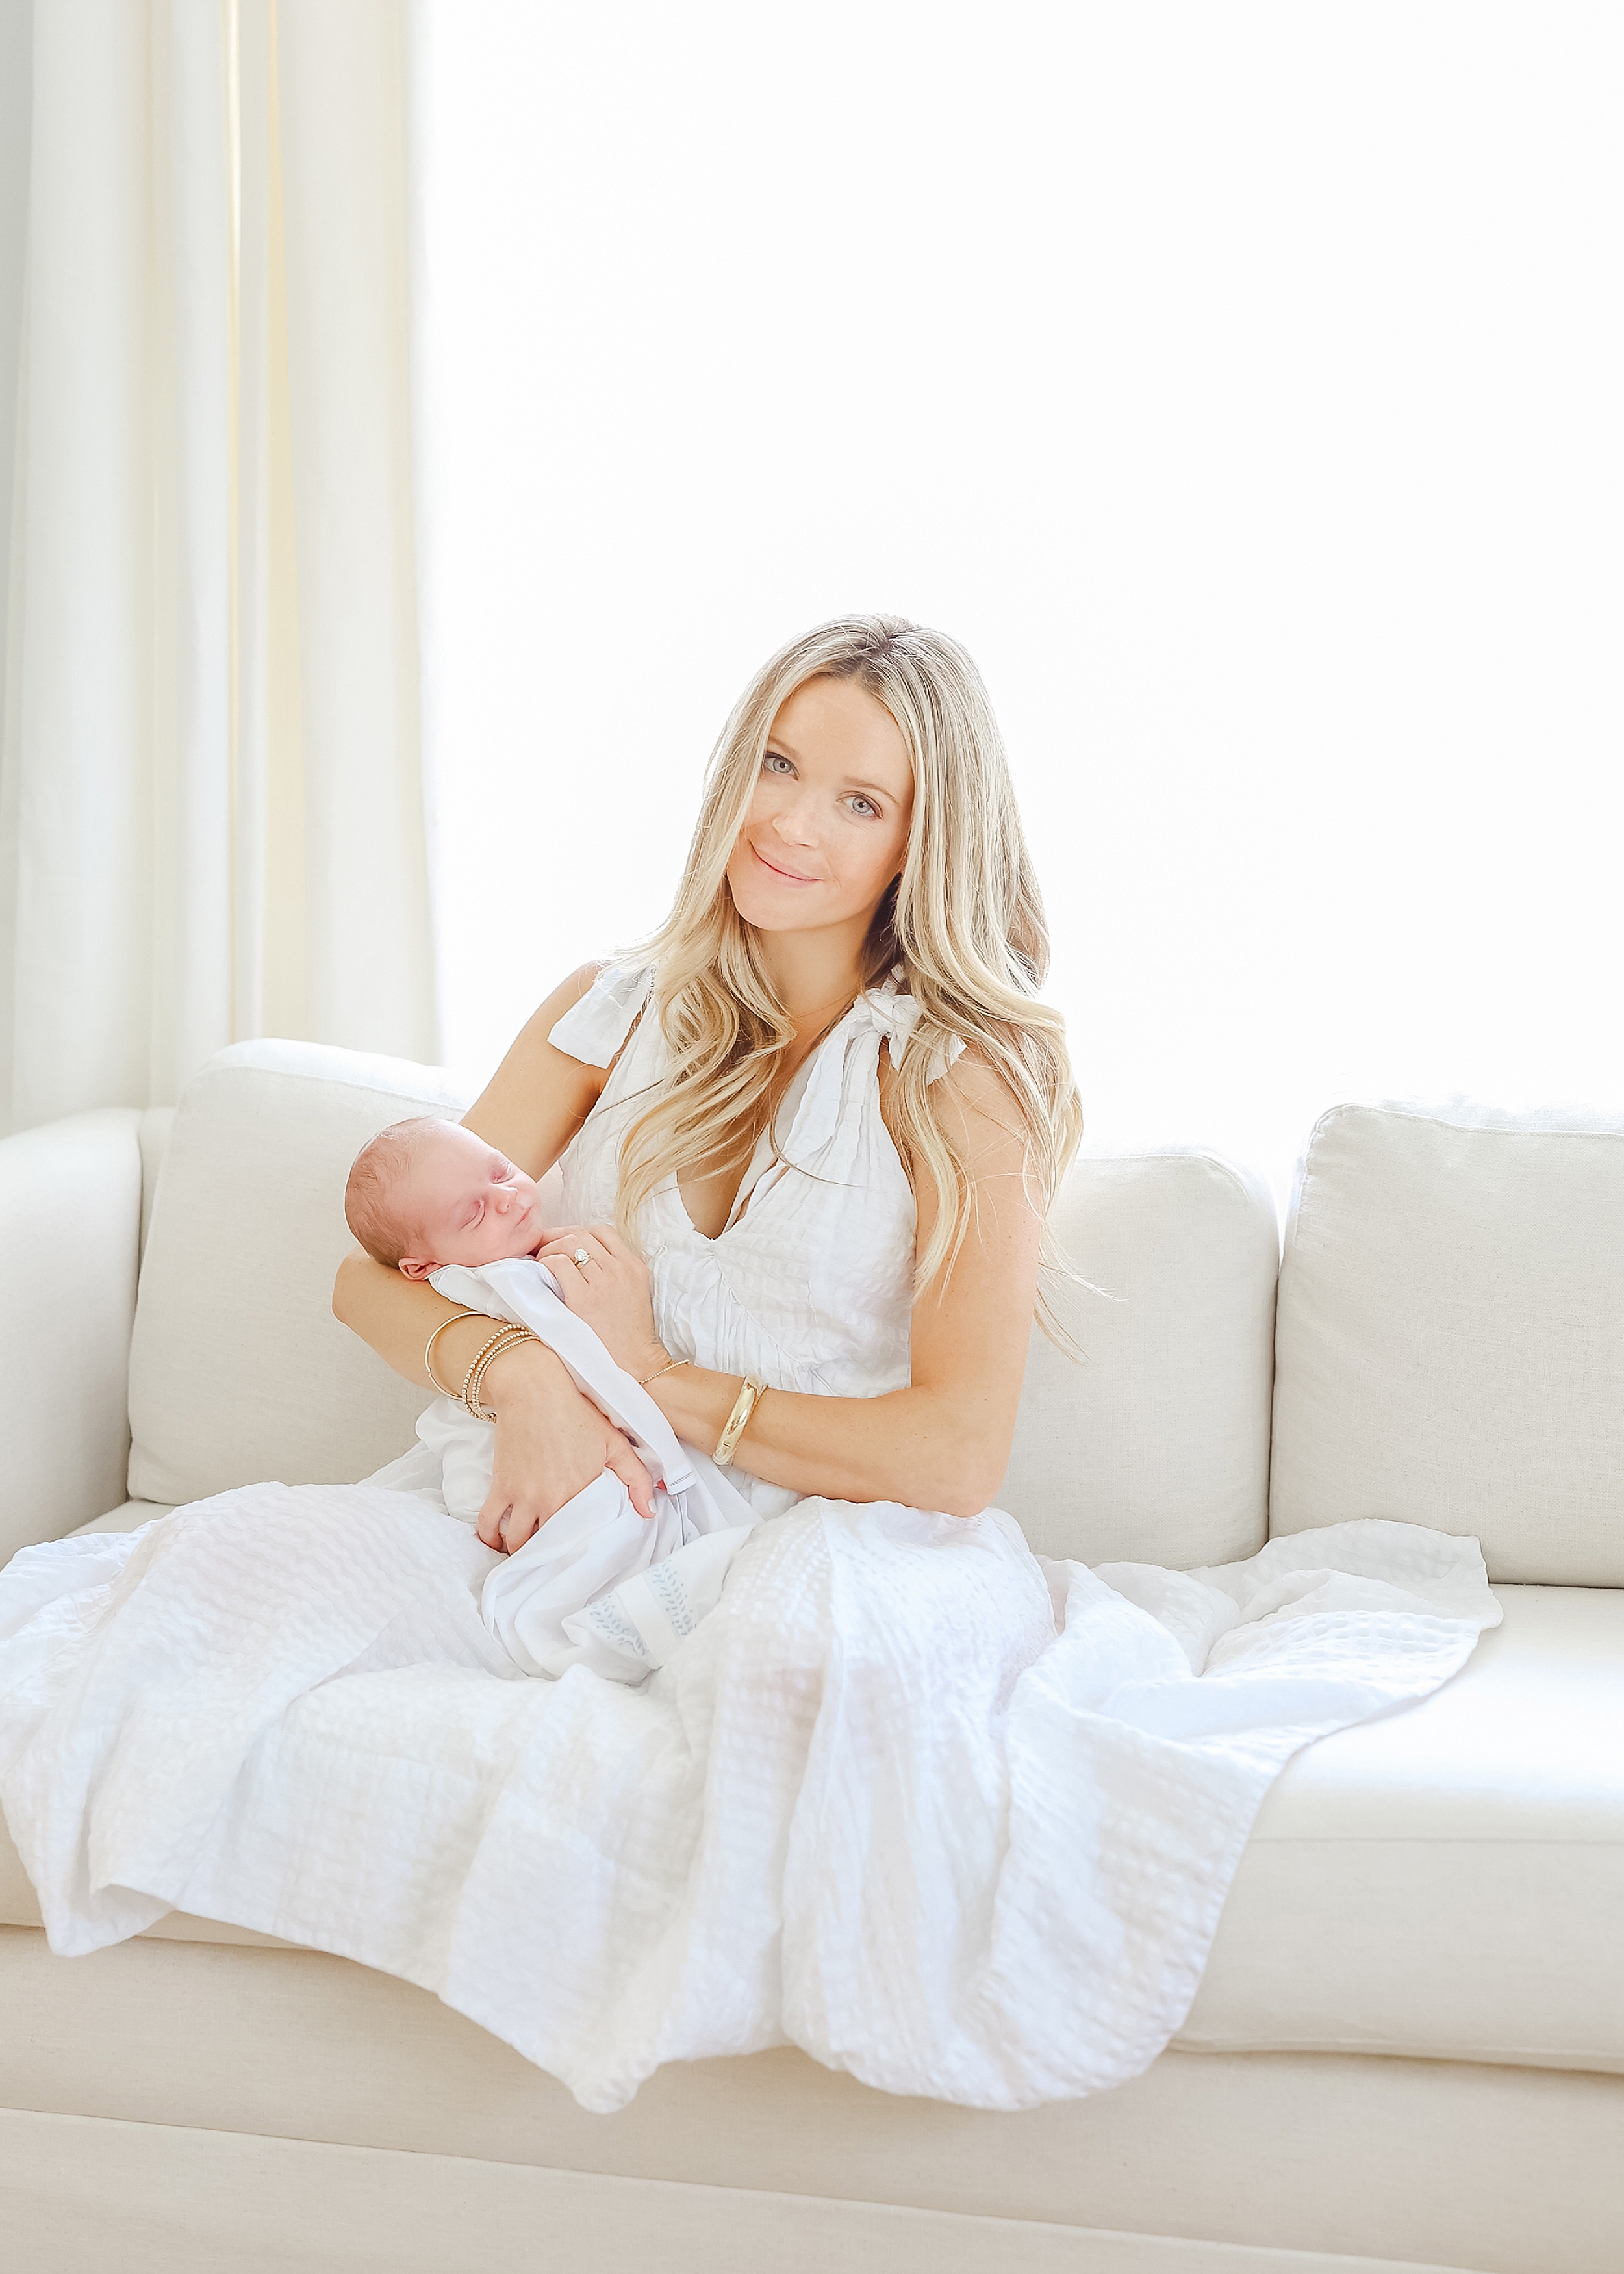 Airy newborn portrait of a mother holding her newborn son all dressed in white.